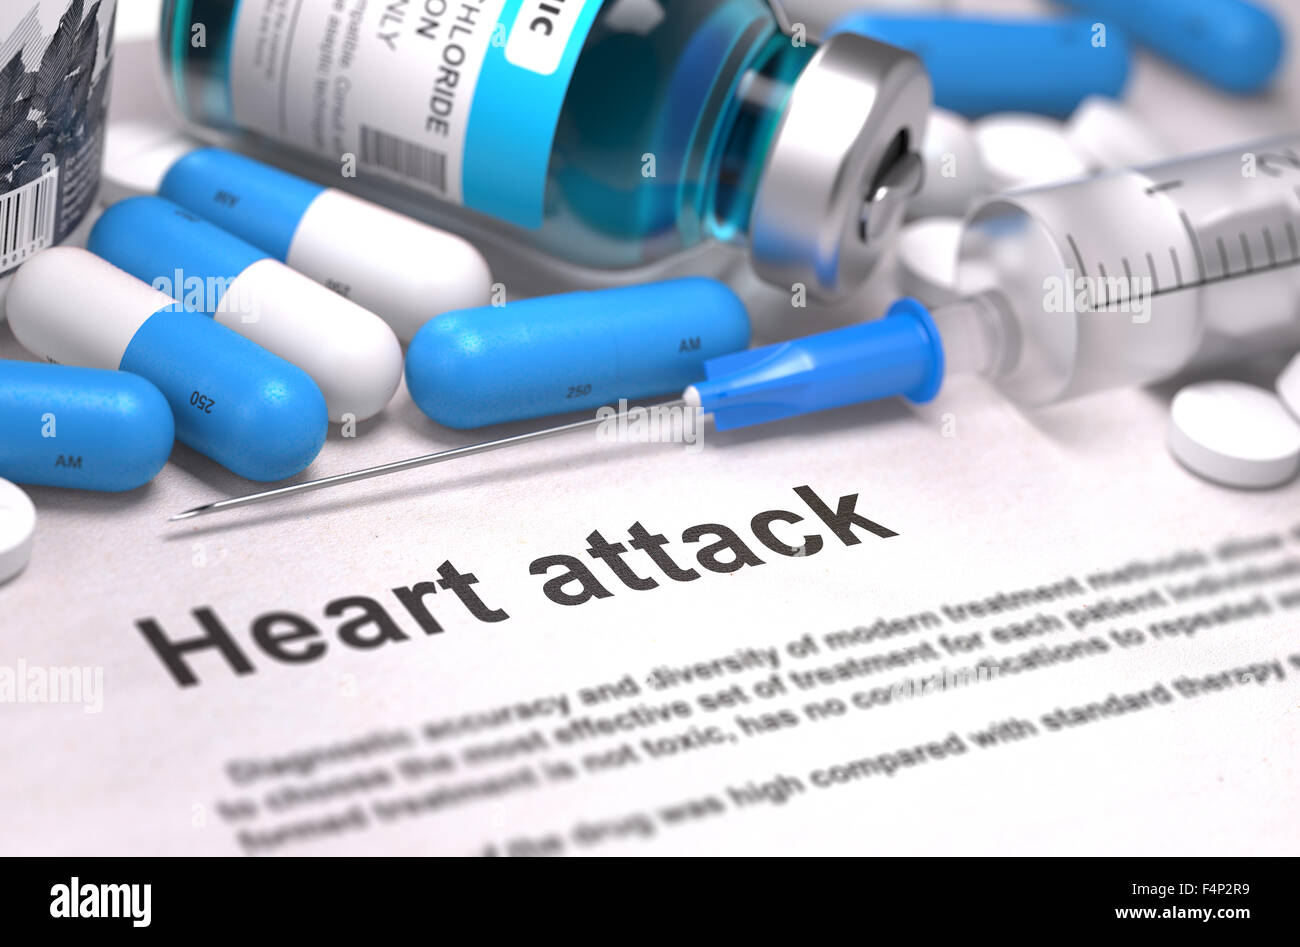 Heart Attack - Printed Diagnosis with Blurred Text. On Background of Medicaments Composition - Blue Pills, Injections and Syring Stock Photo